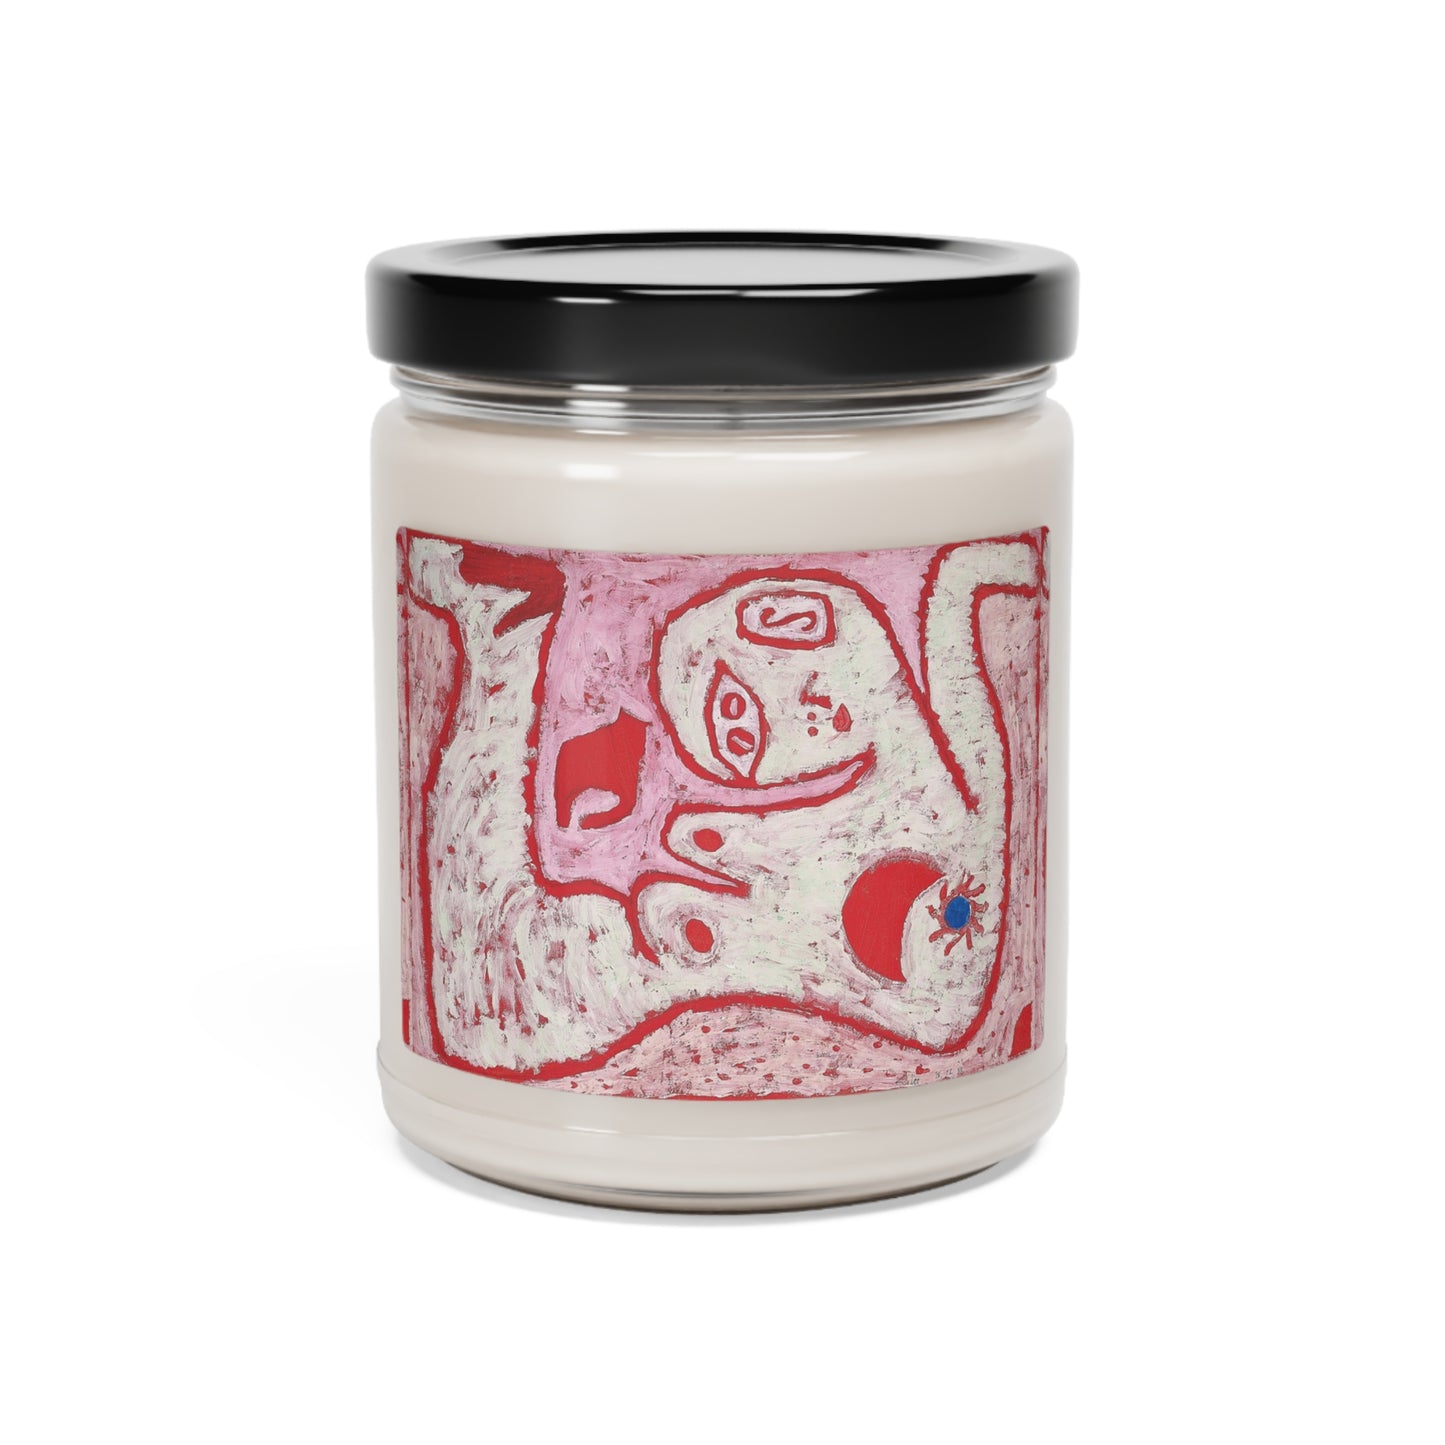 PAUL KLEE - A WOMAN FOR GODS - SOY CANDLE